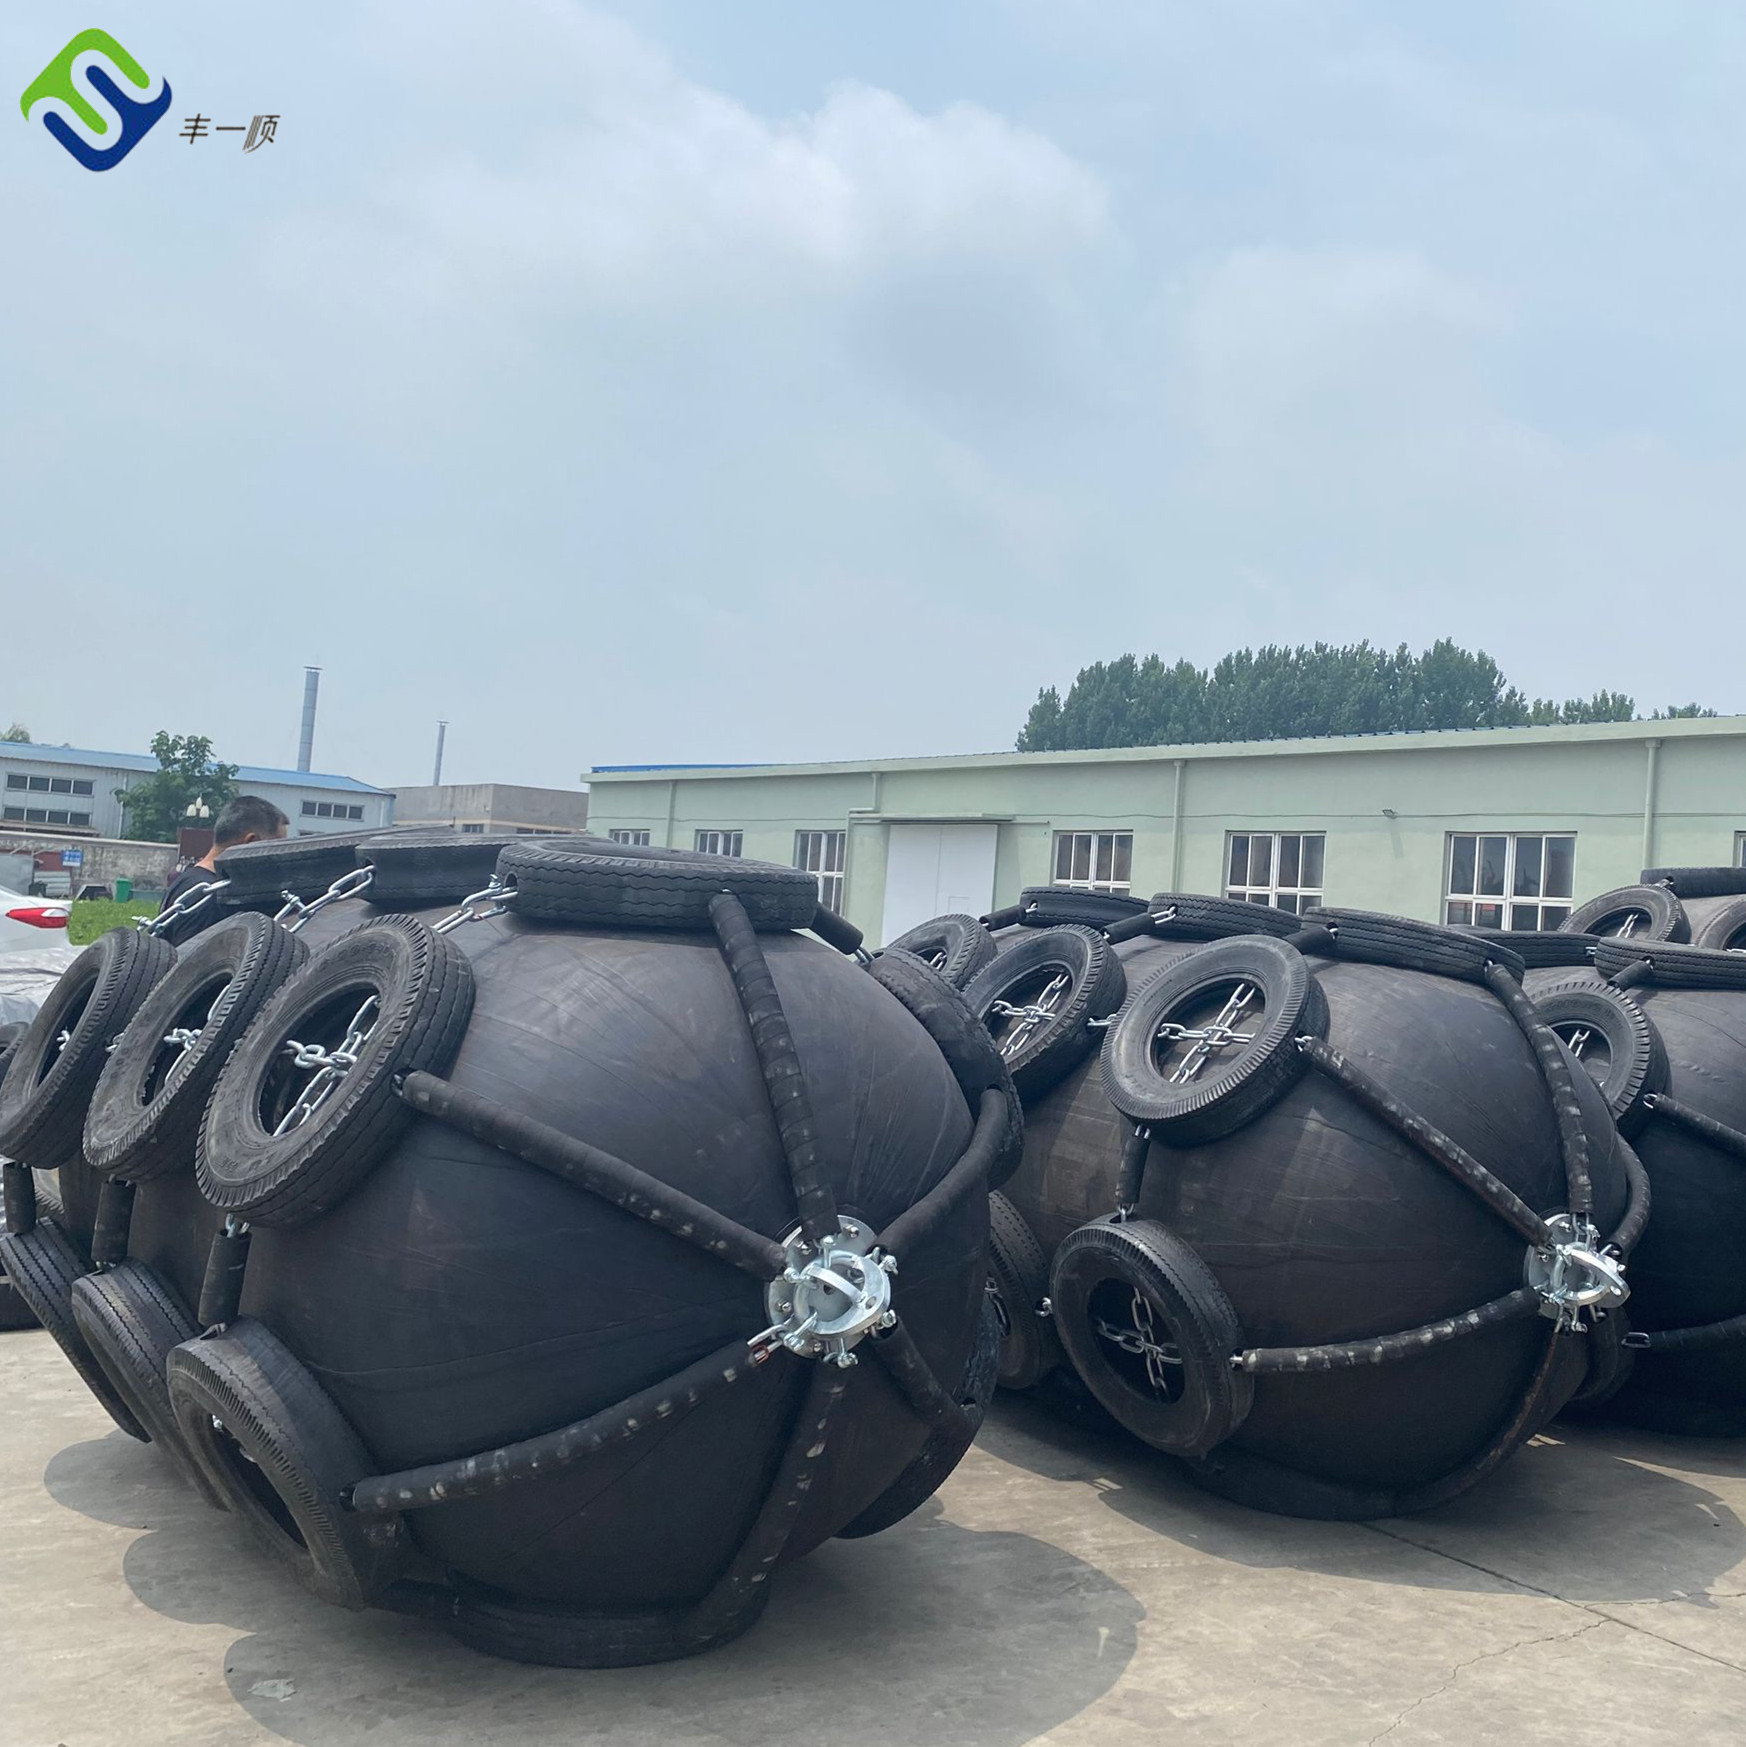 Marine Floating Pneumatic Rubber Fender For Berthing And Docking